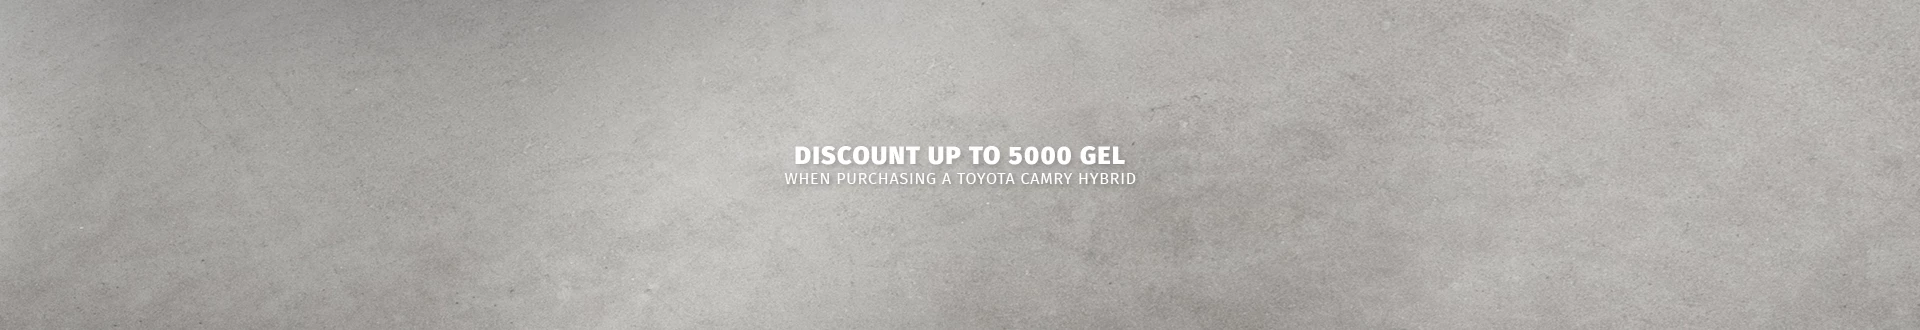 Offer Cover Image Discount up to 5000 GEL